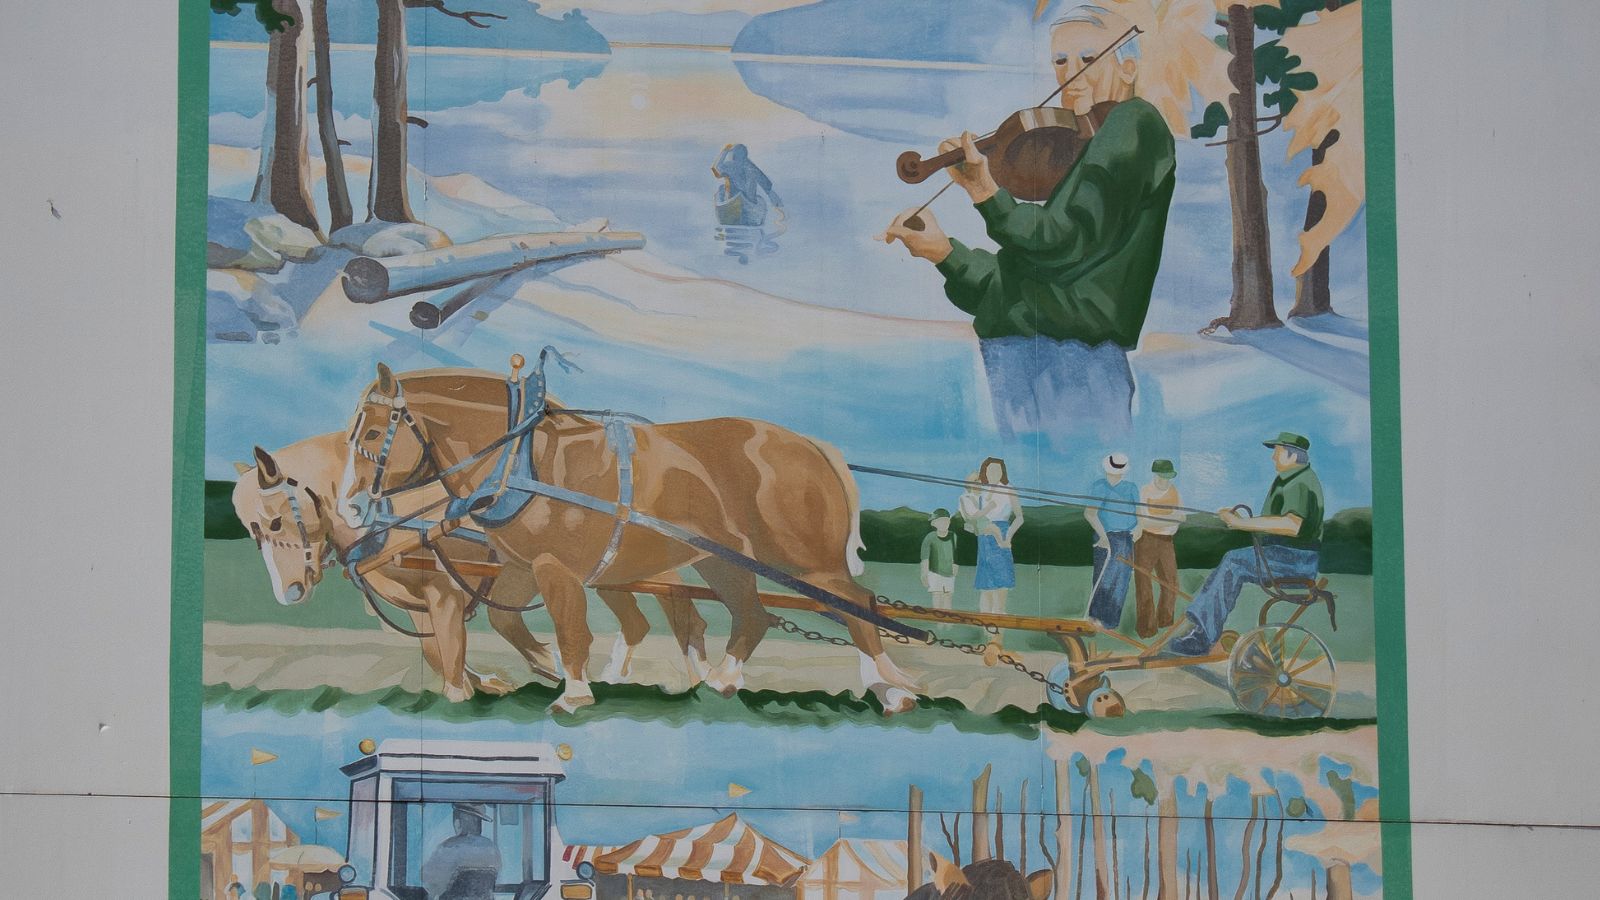 Photo of the A Celebration of Rural Living mural.